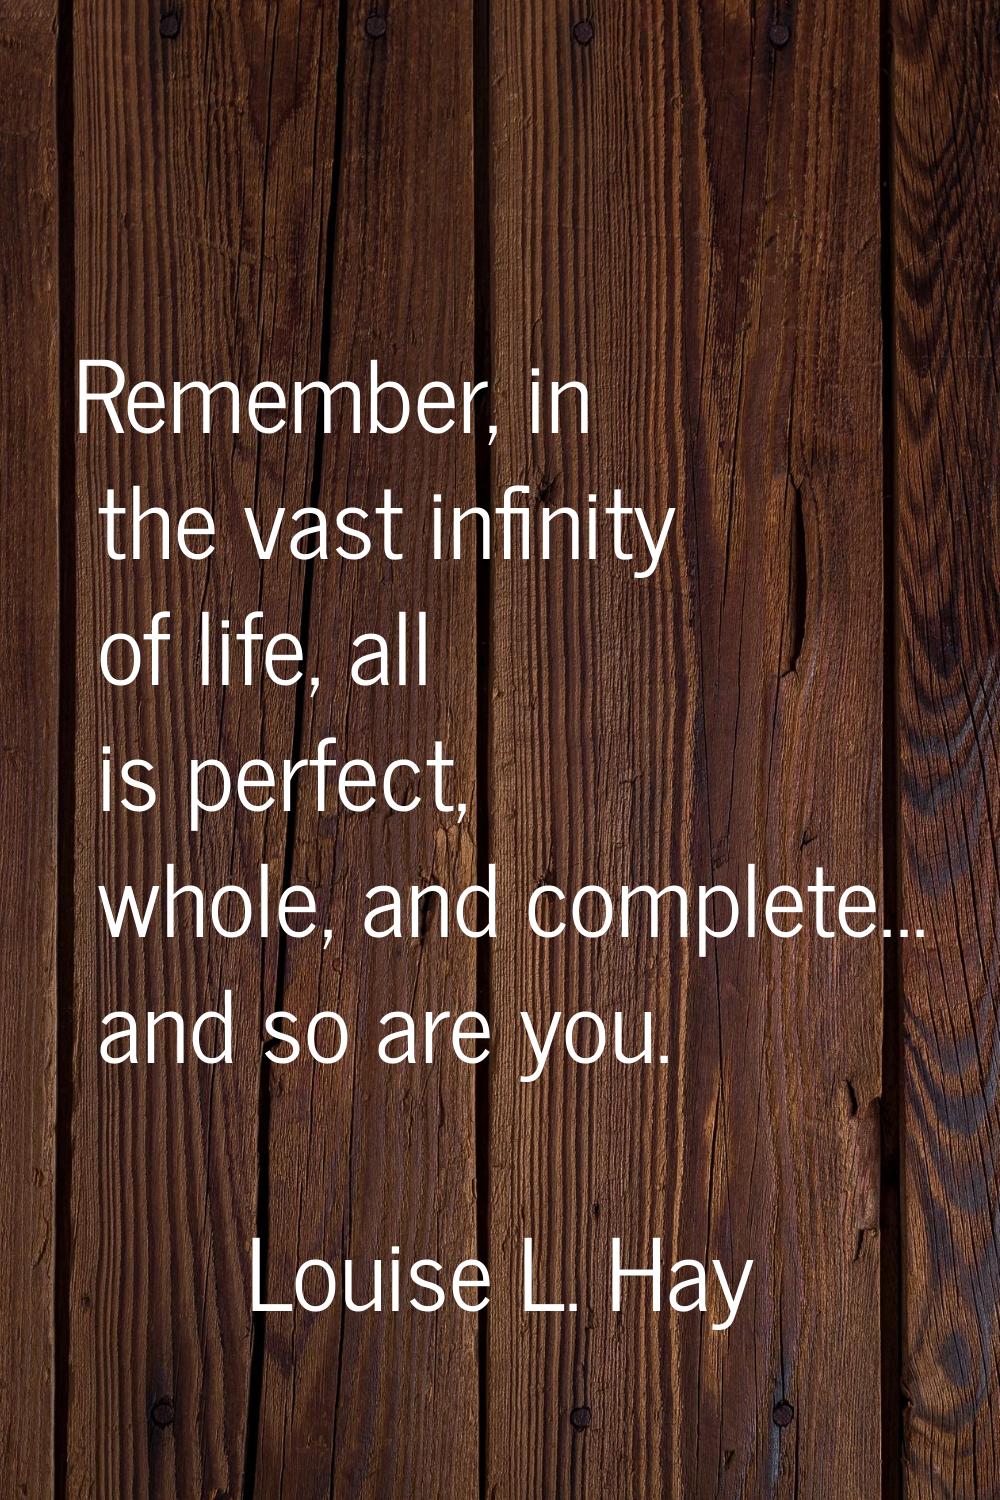 Remember, in the vast infinity of life, all is perfect, whole, and complete... and so are you.